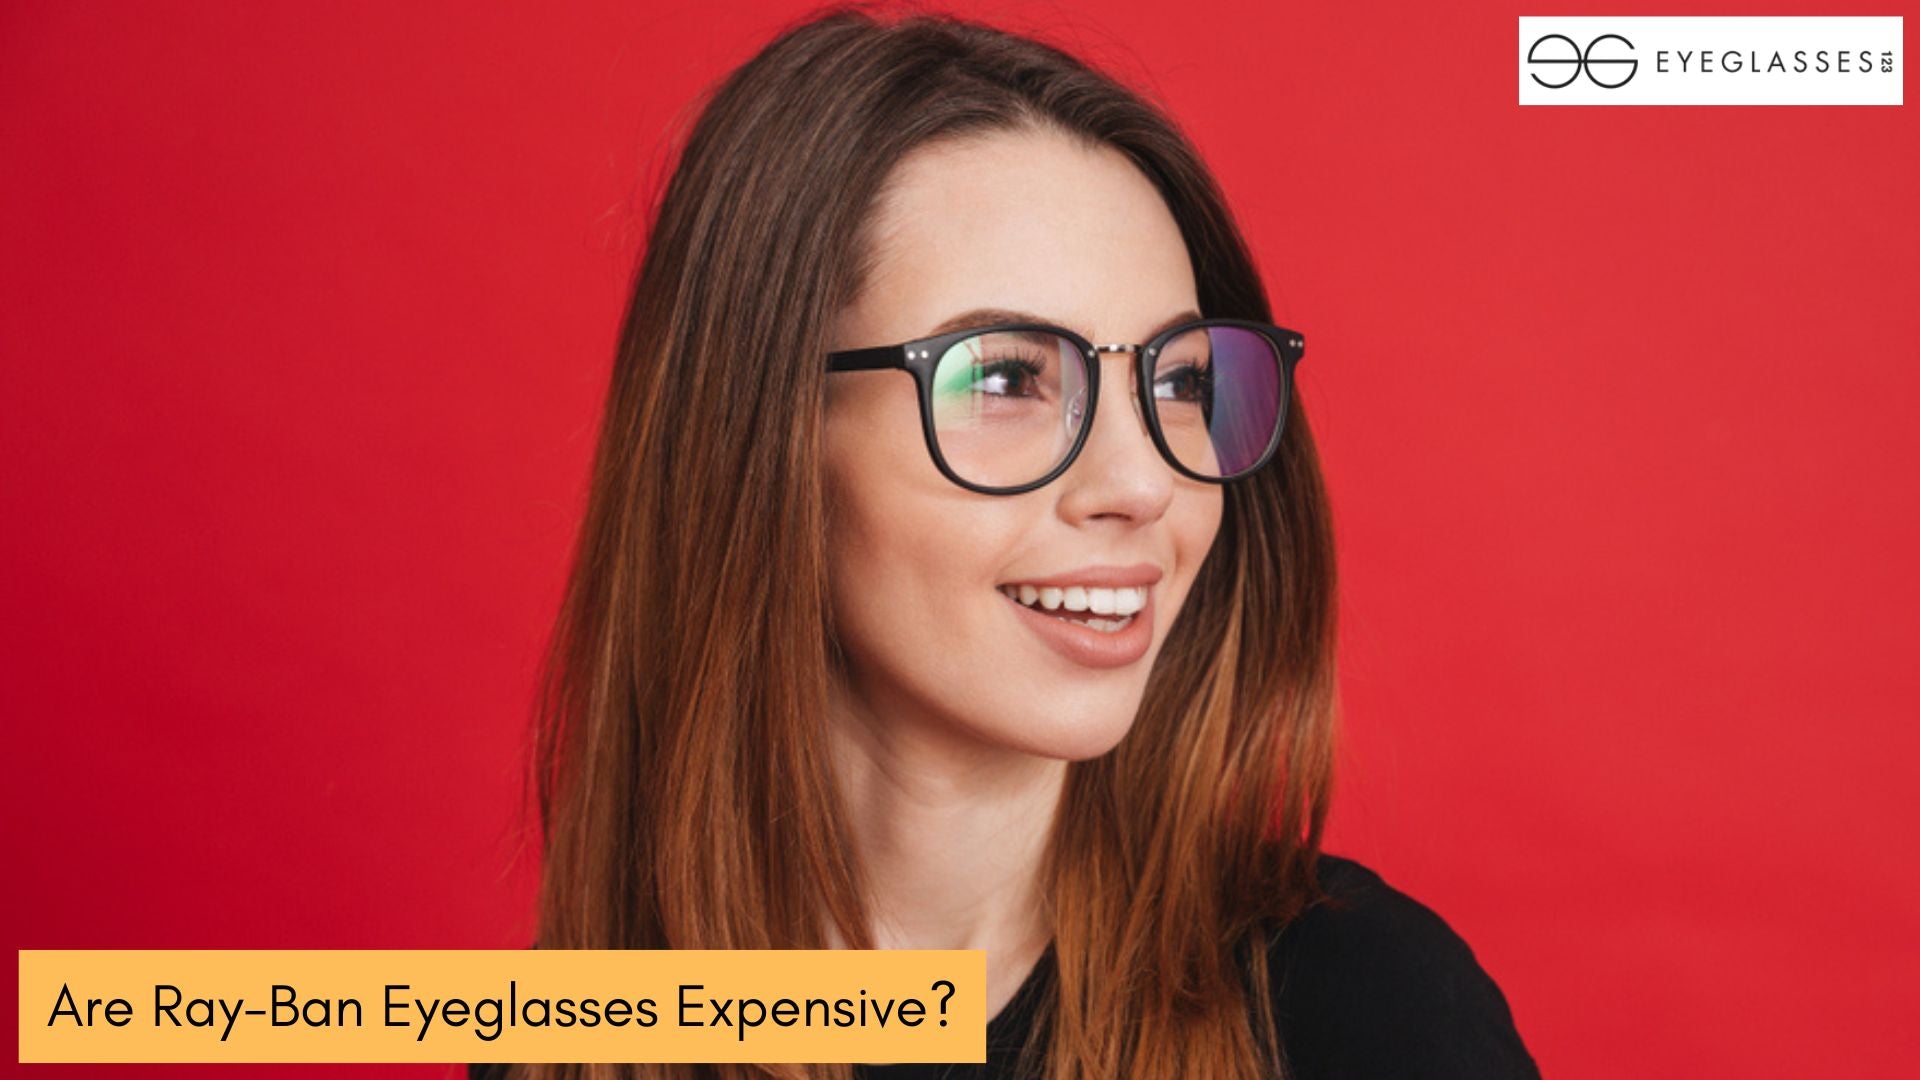 Are Ray-Ban Eyeglasses Expensive?